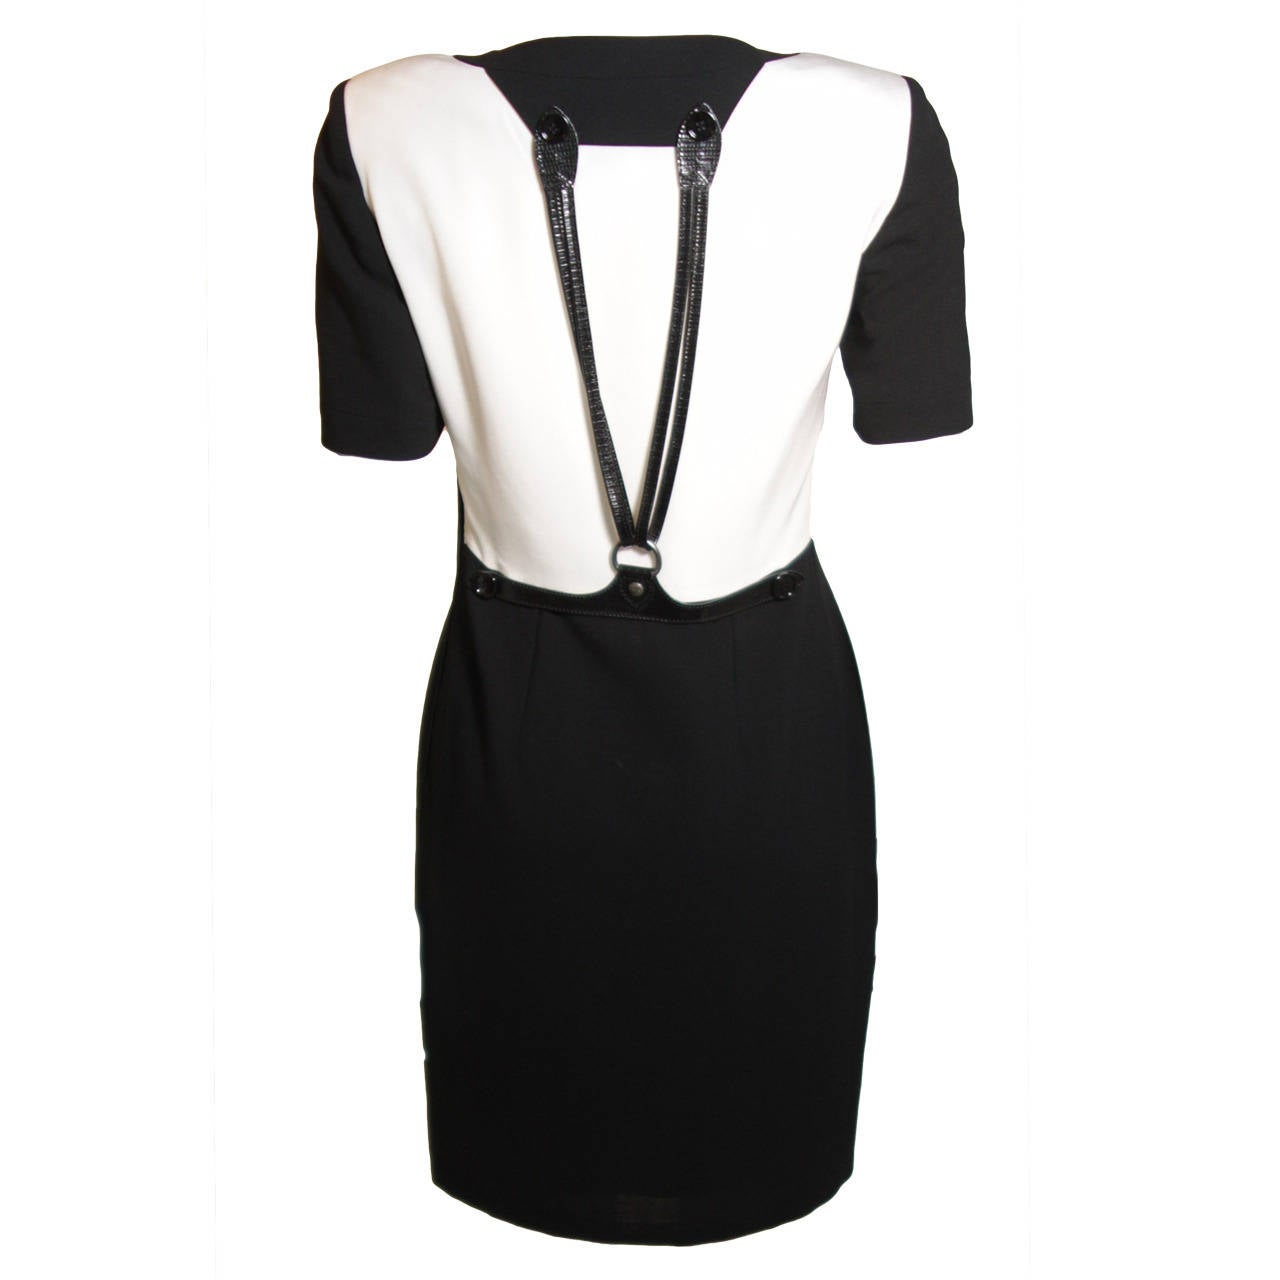 Gianfranco Ferre Black and White Contrast Dress with Suspender detail Size 40 For Sale